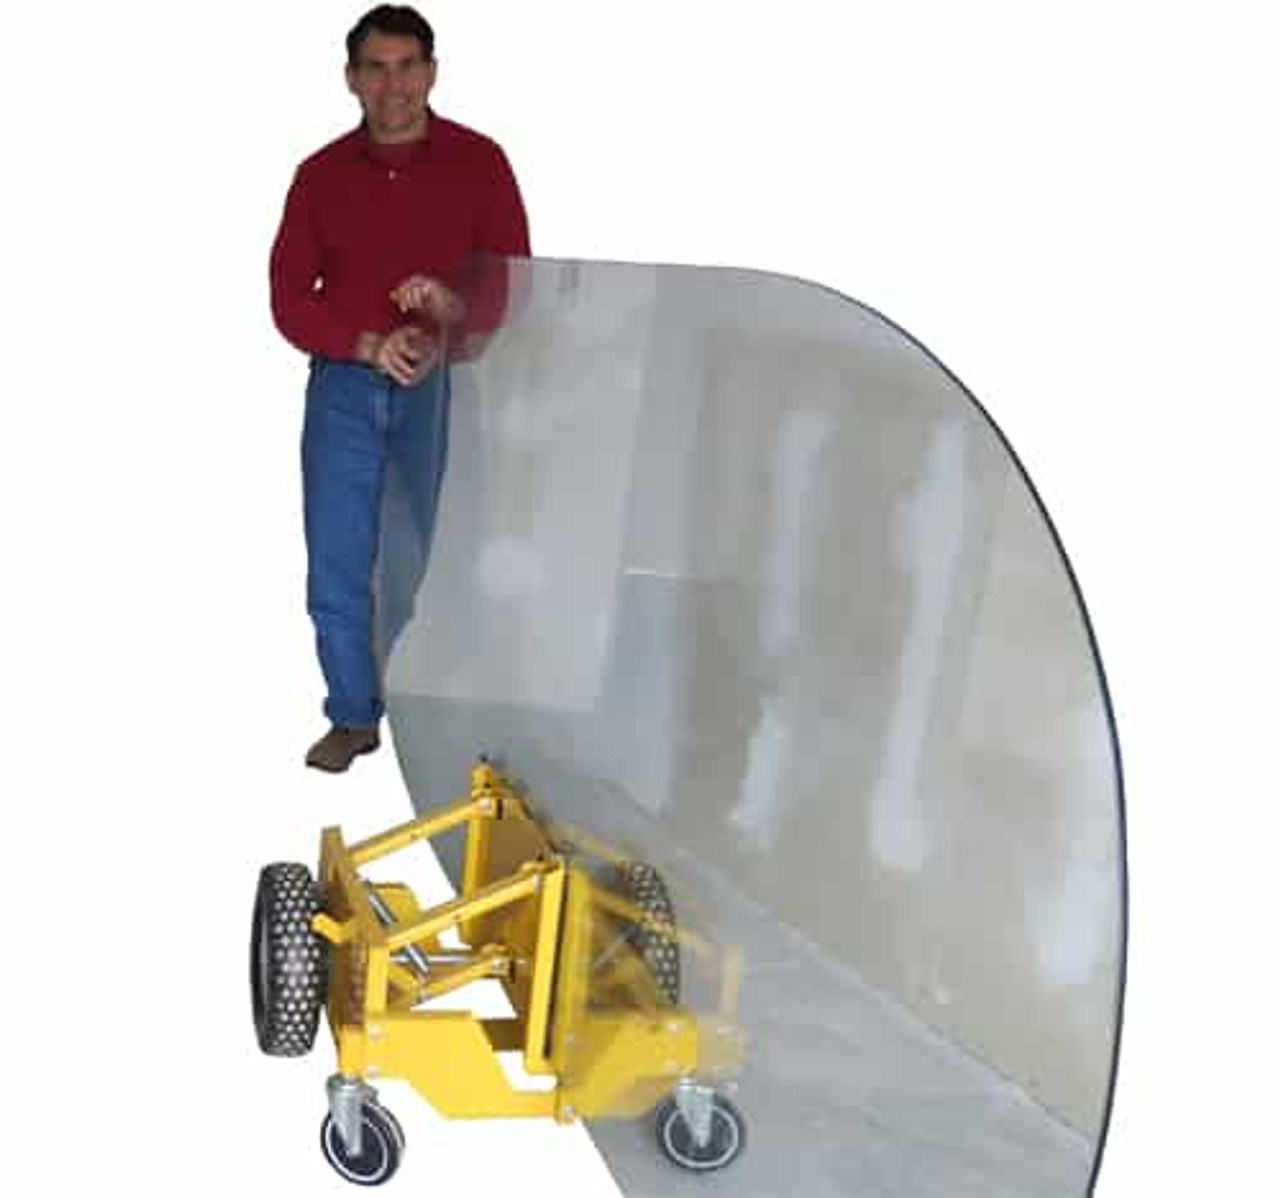 SAWTRAX PANEL EXPRESS SUBSTRATE DRYWALL SHEETROCK PLYWOOD CART DOLLY ALL-TERRAIN 